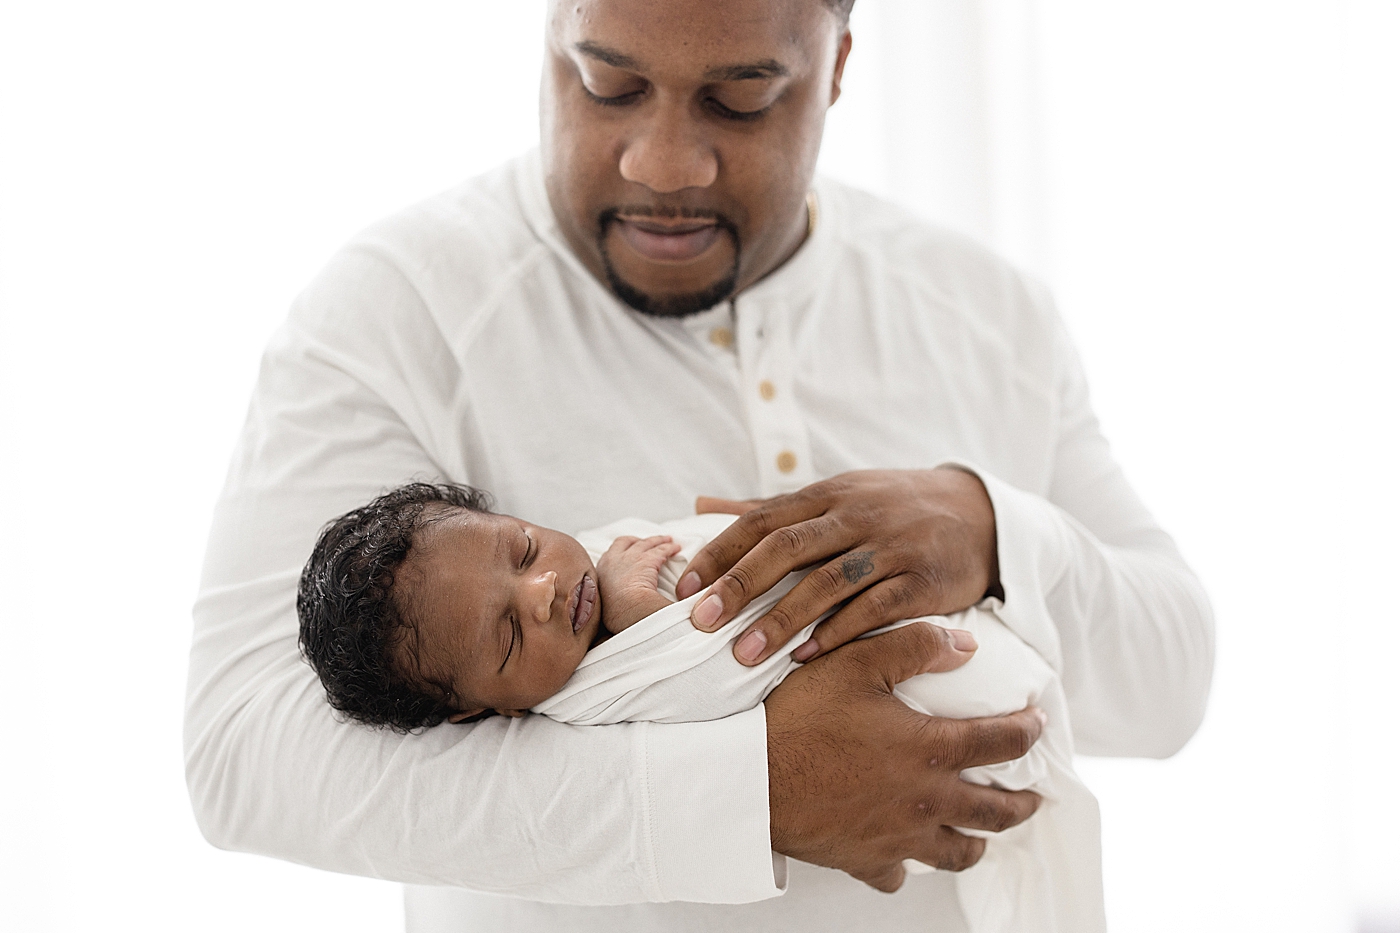 Dad holding son in his arms during newborn session in Tampa studio. Photo by Brittany Elise Photography.